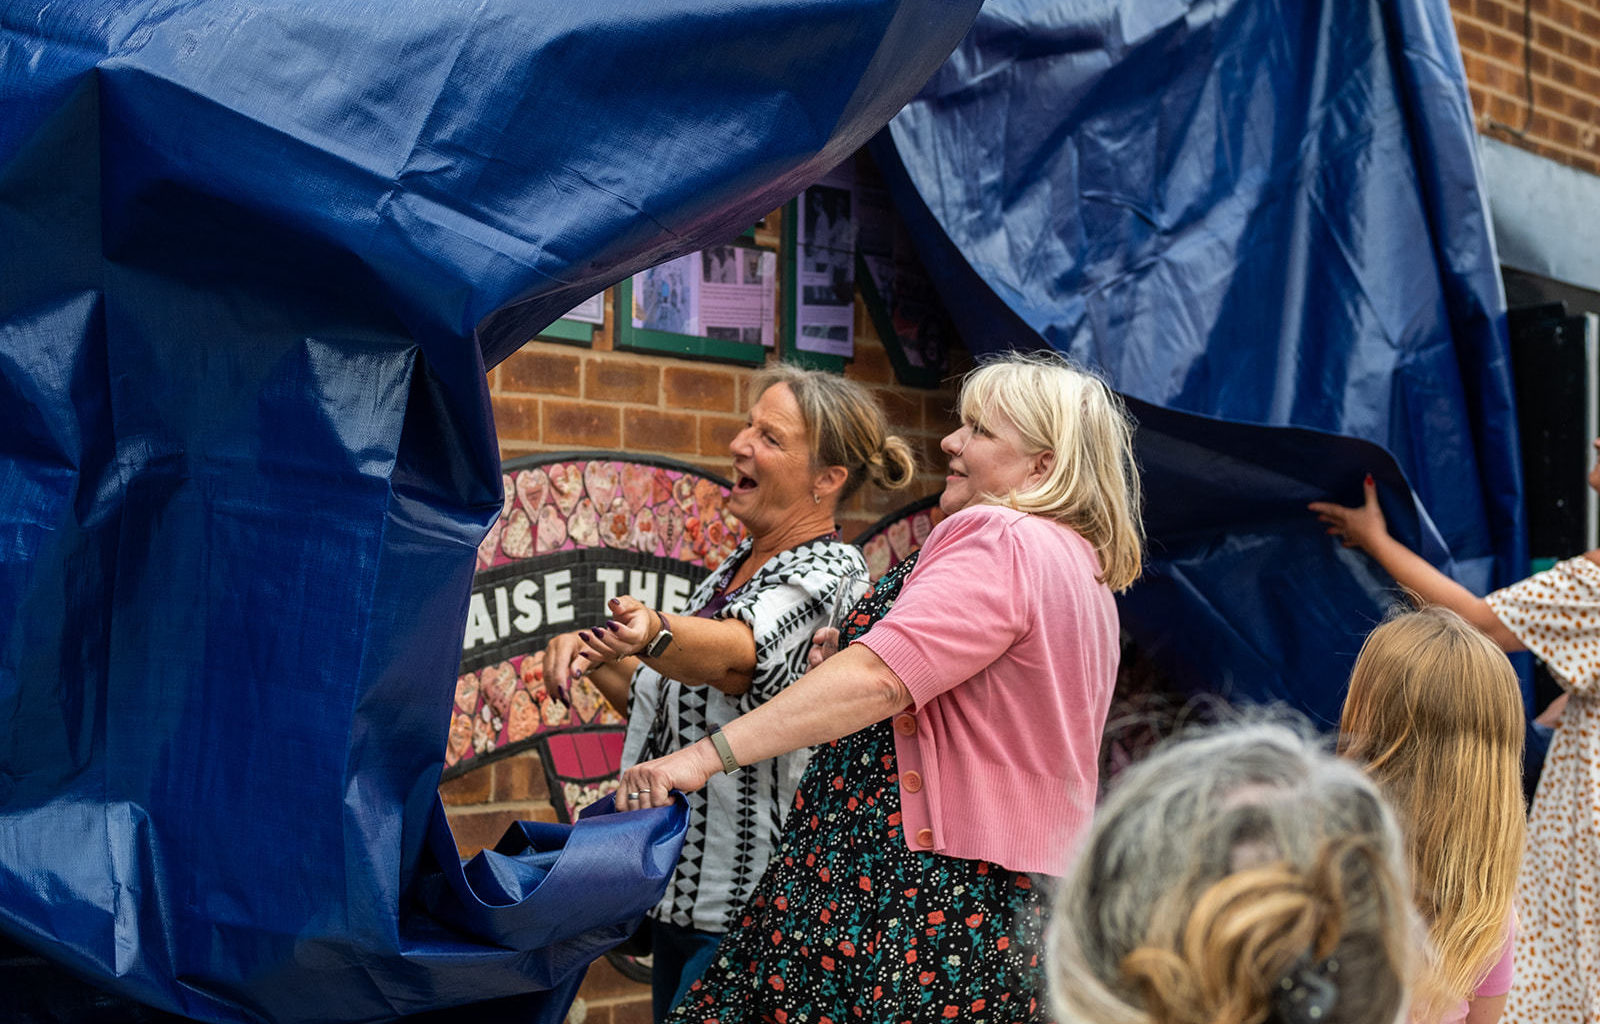 Carrie and a member of the St Helens community tear away the dark blue tarpaulin to reveal the mural.